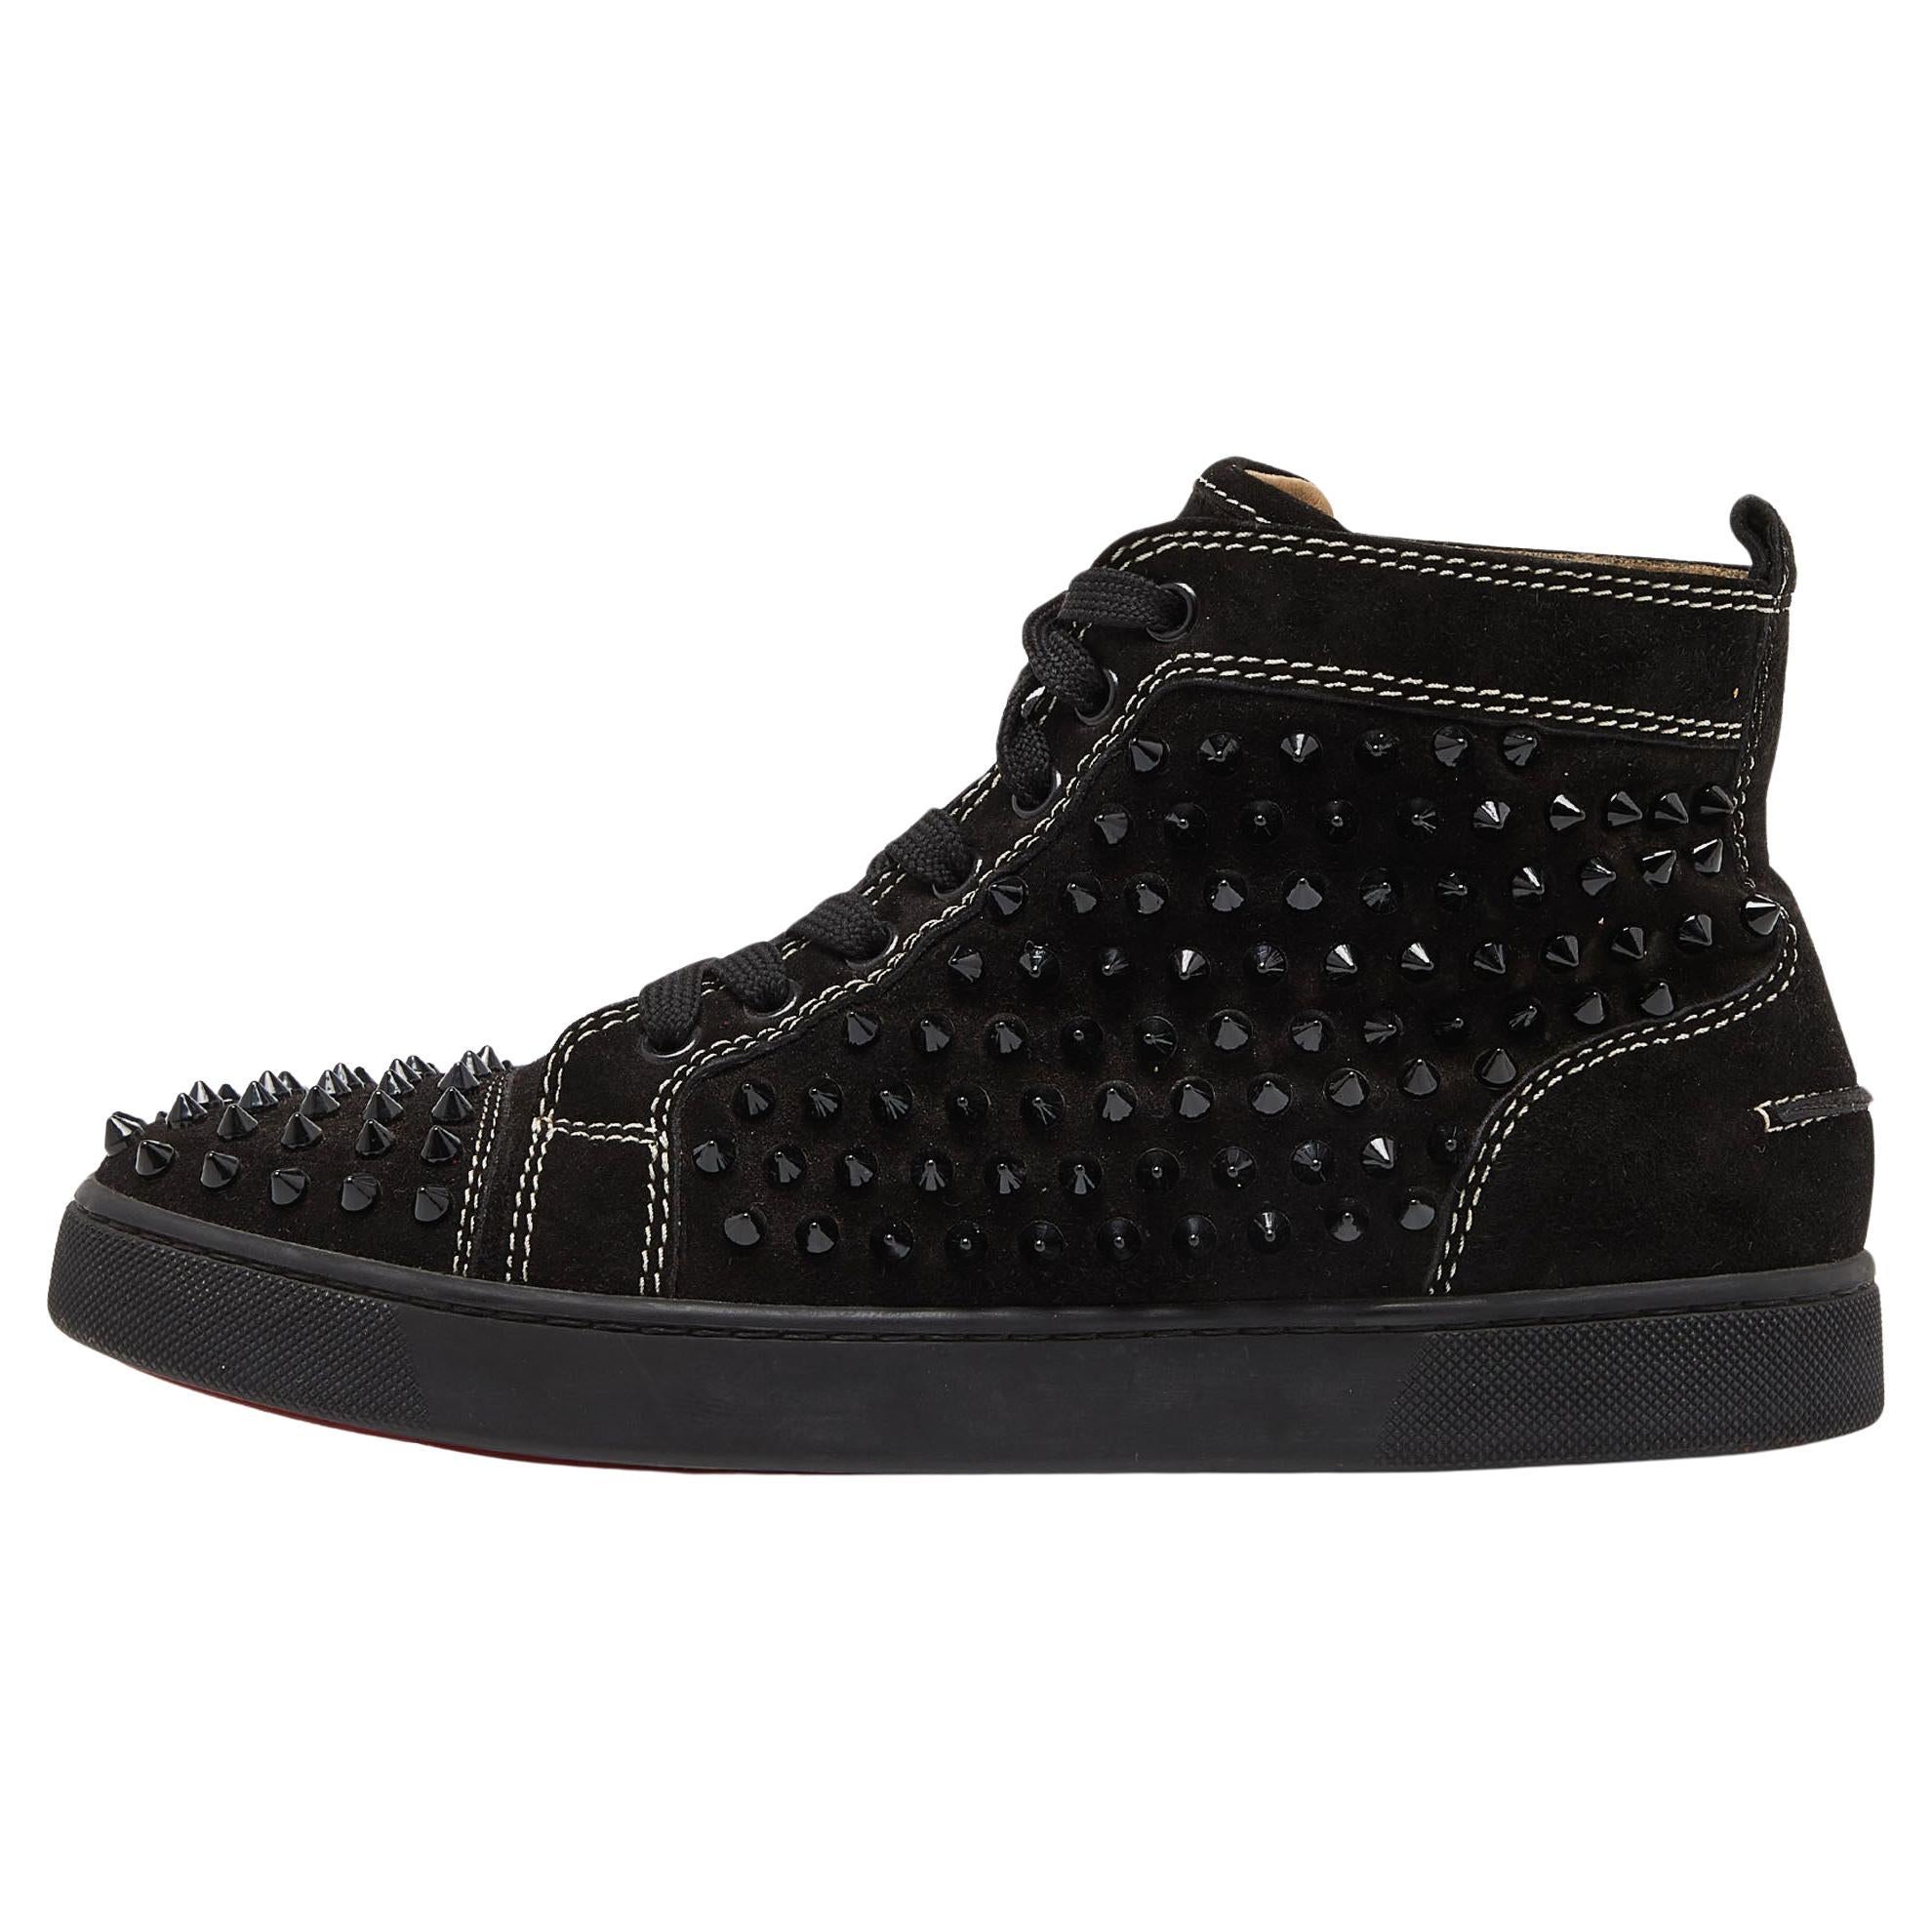 Christian Louboutin Black Suede Spike High Top Sneakers Size 40 For Sale